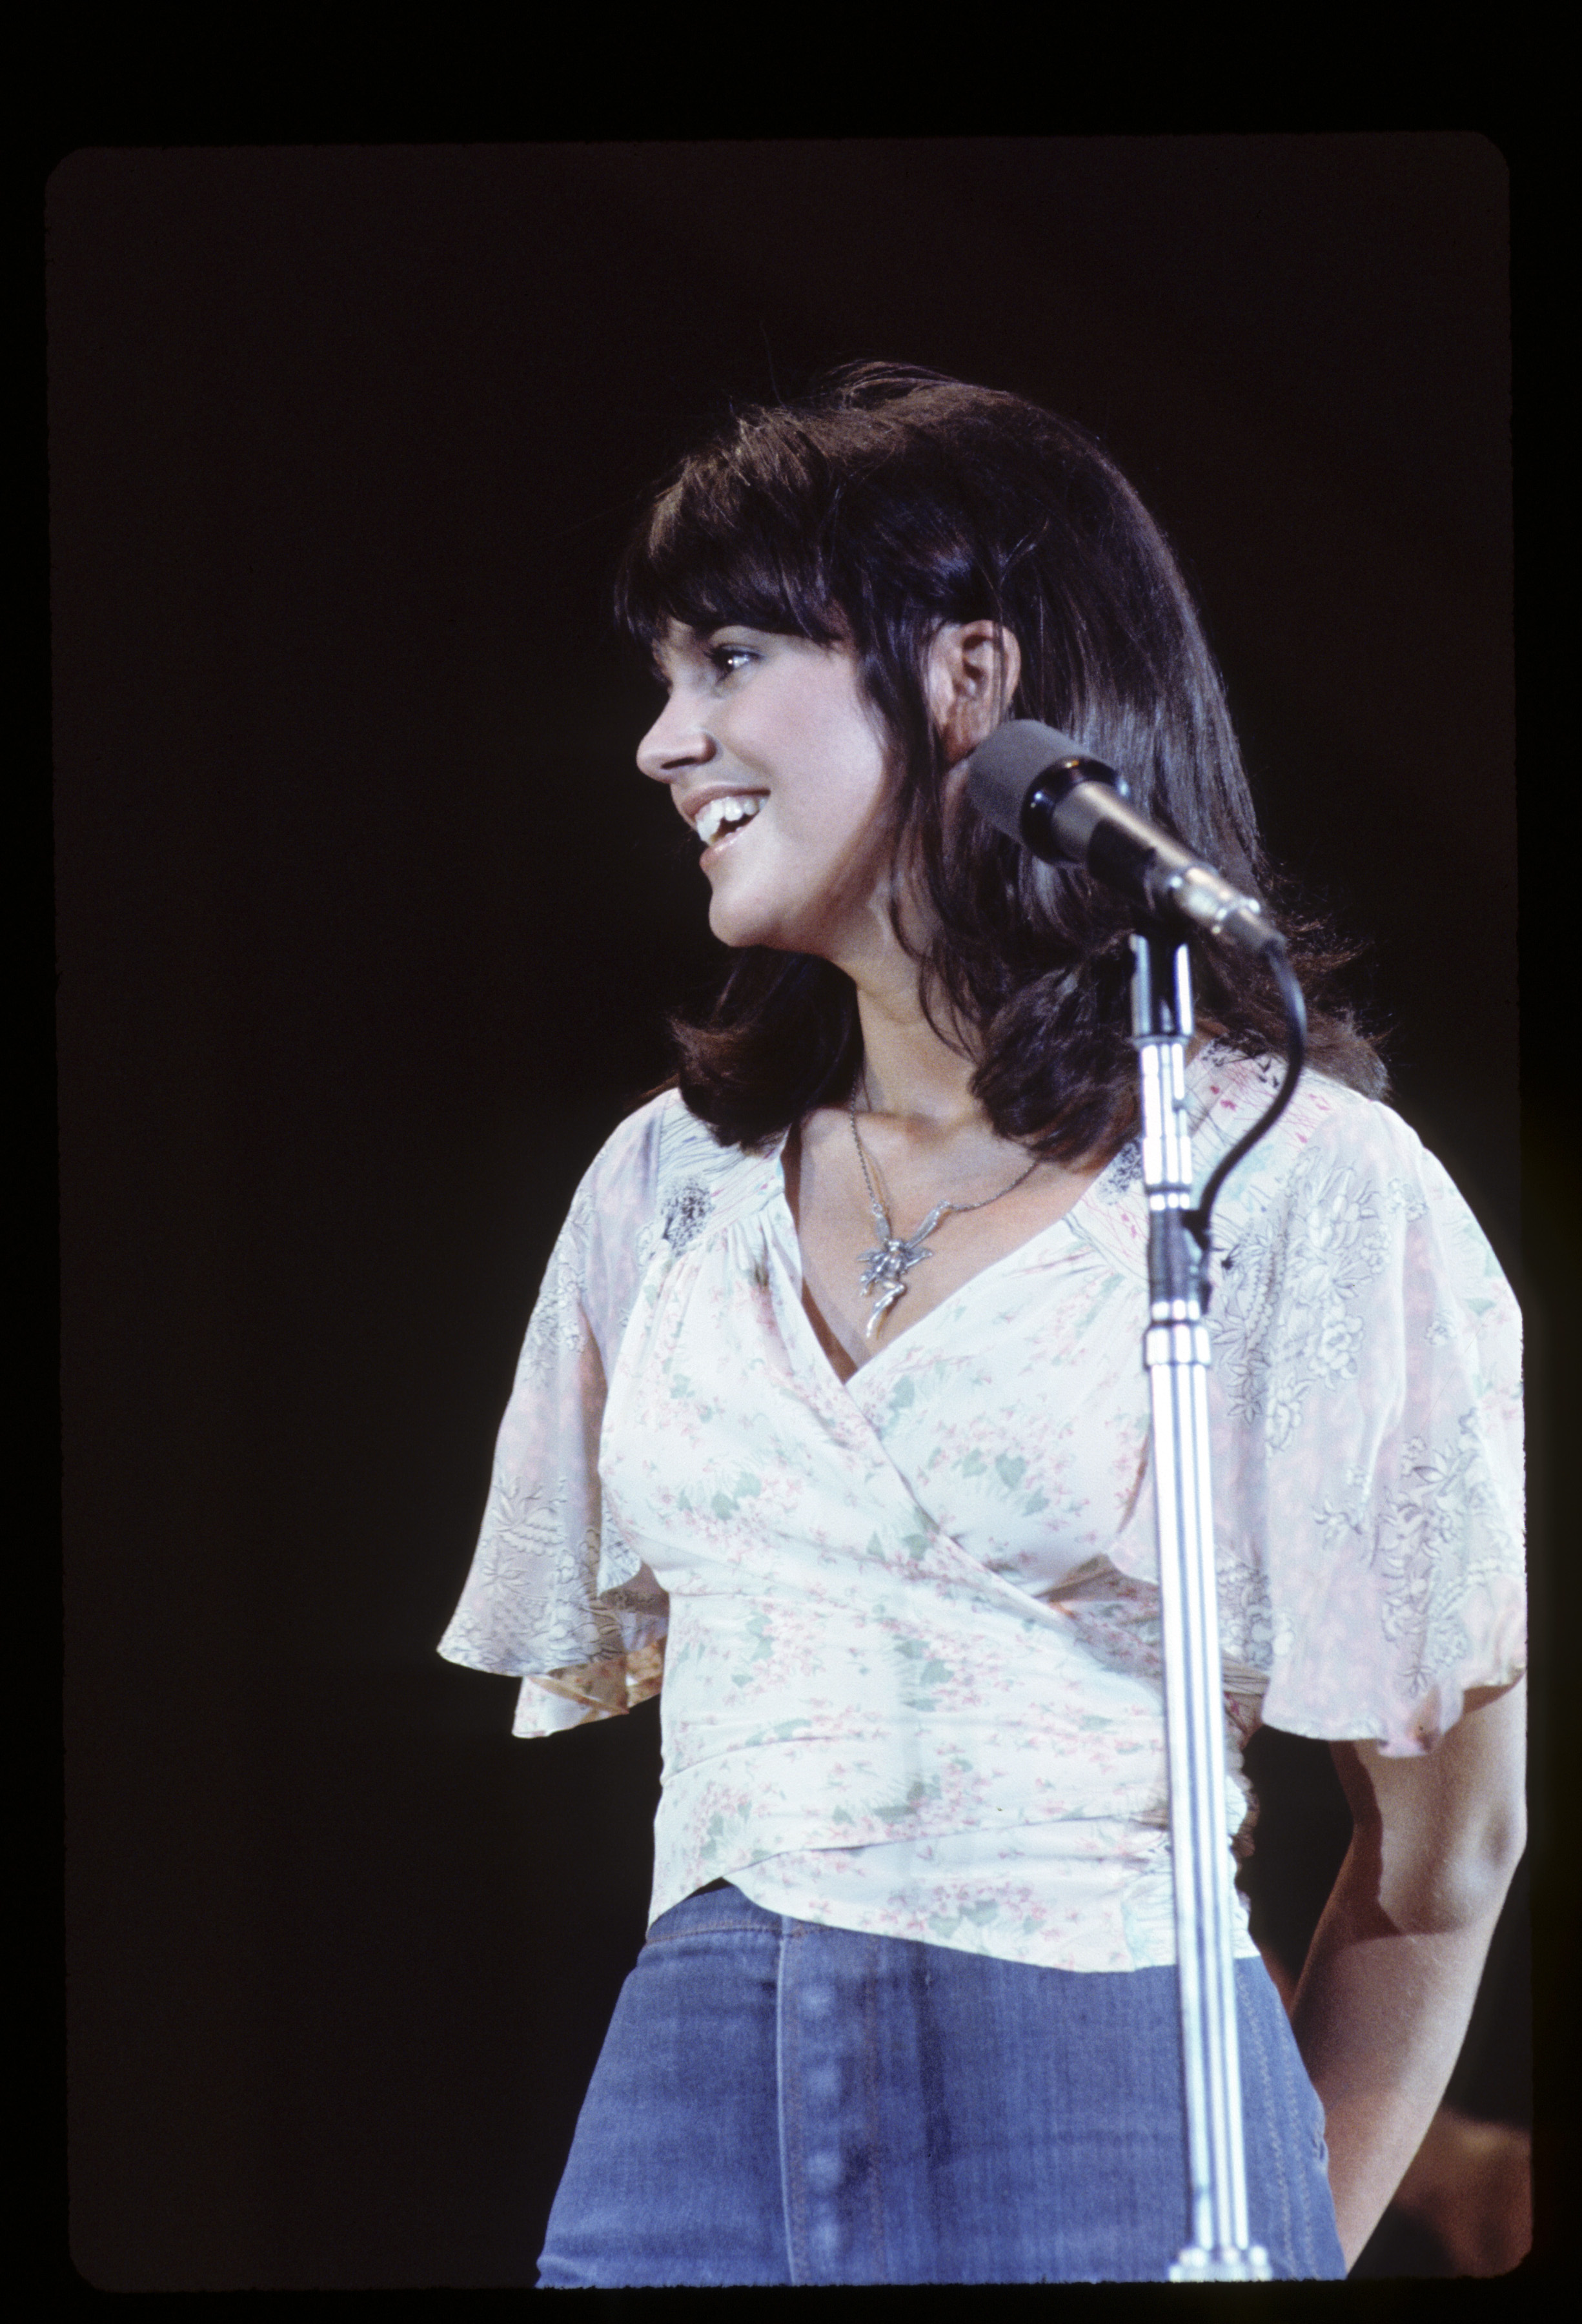 Linda Ronstadt pictured at a concert on October 24, 1973 | Source: Getty Images